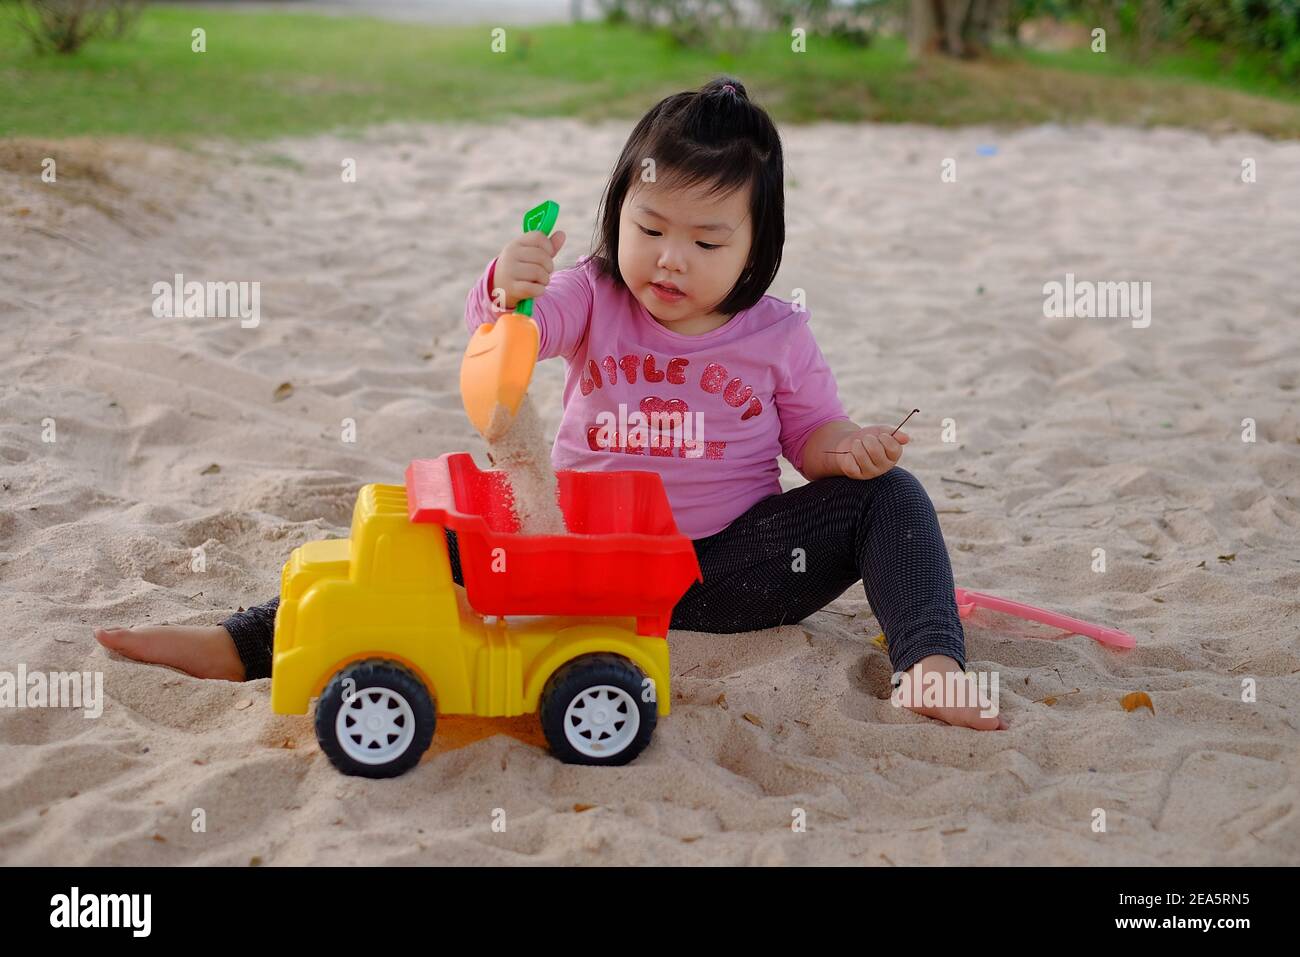 A cute young Asian girl playing with colorful plastic toys and sand in a sandbox, having fun, smiling. Stock Photo